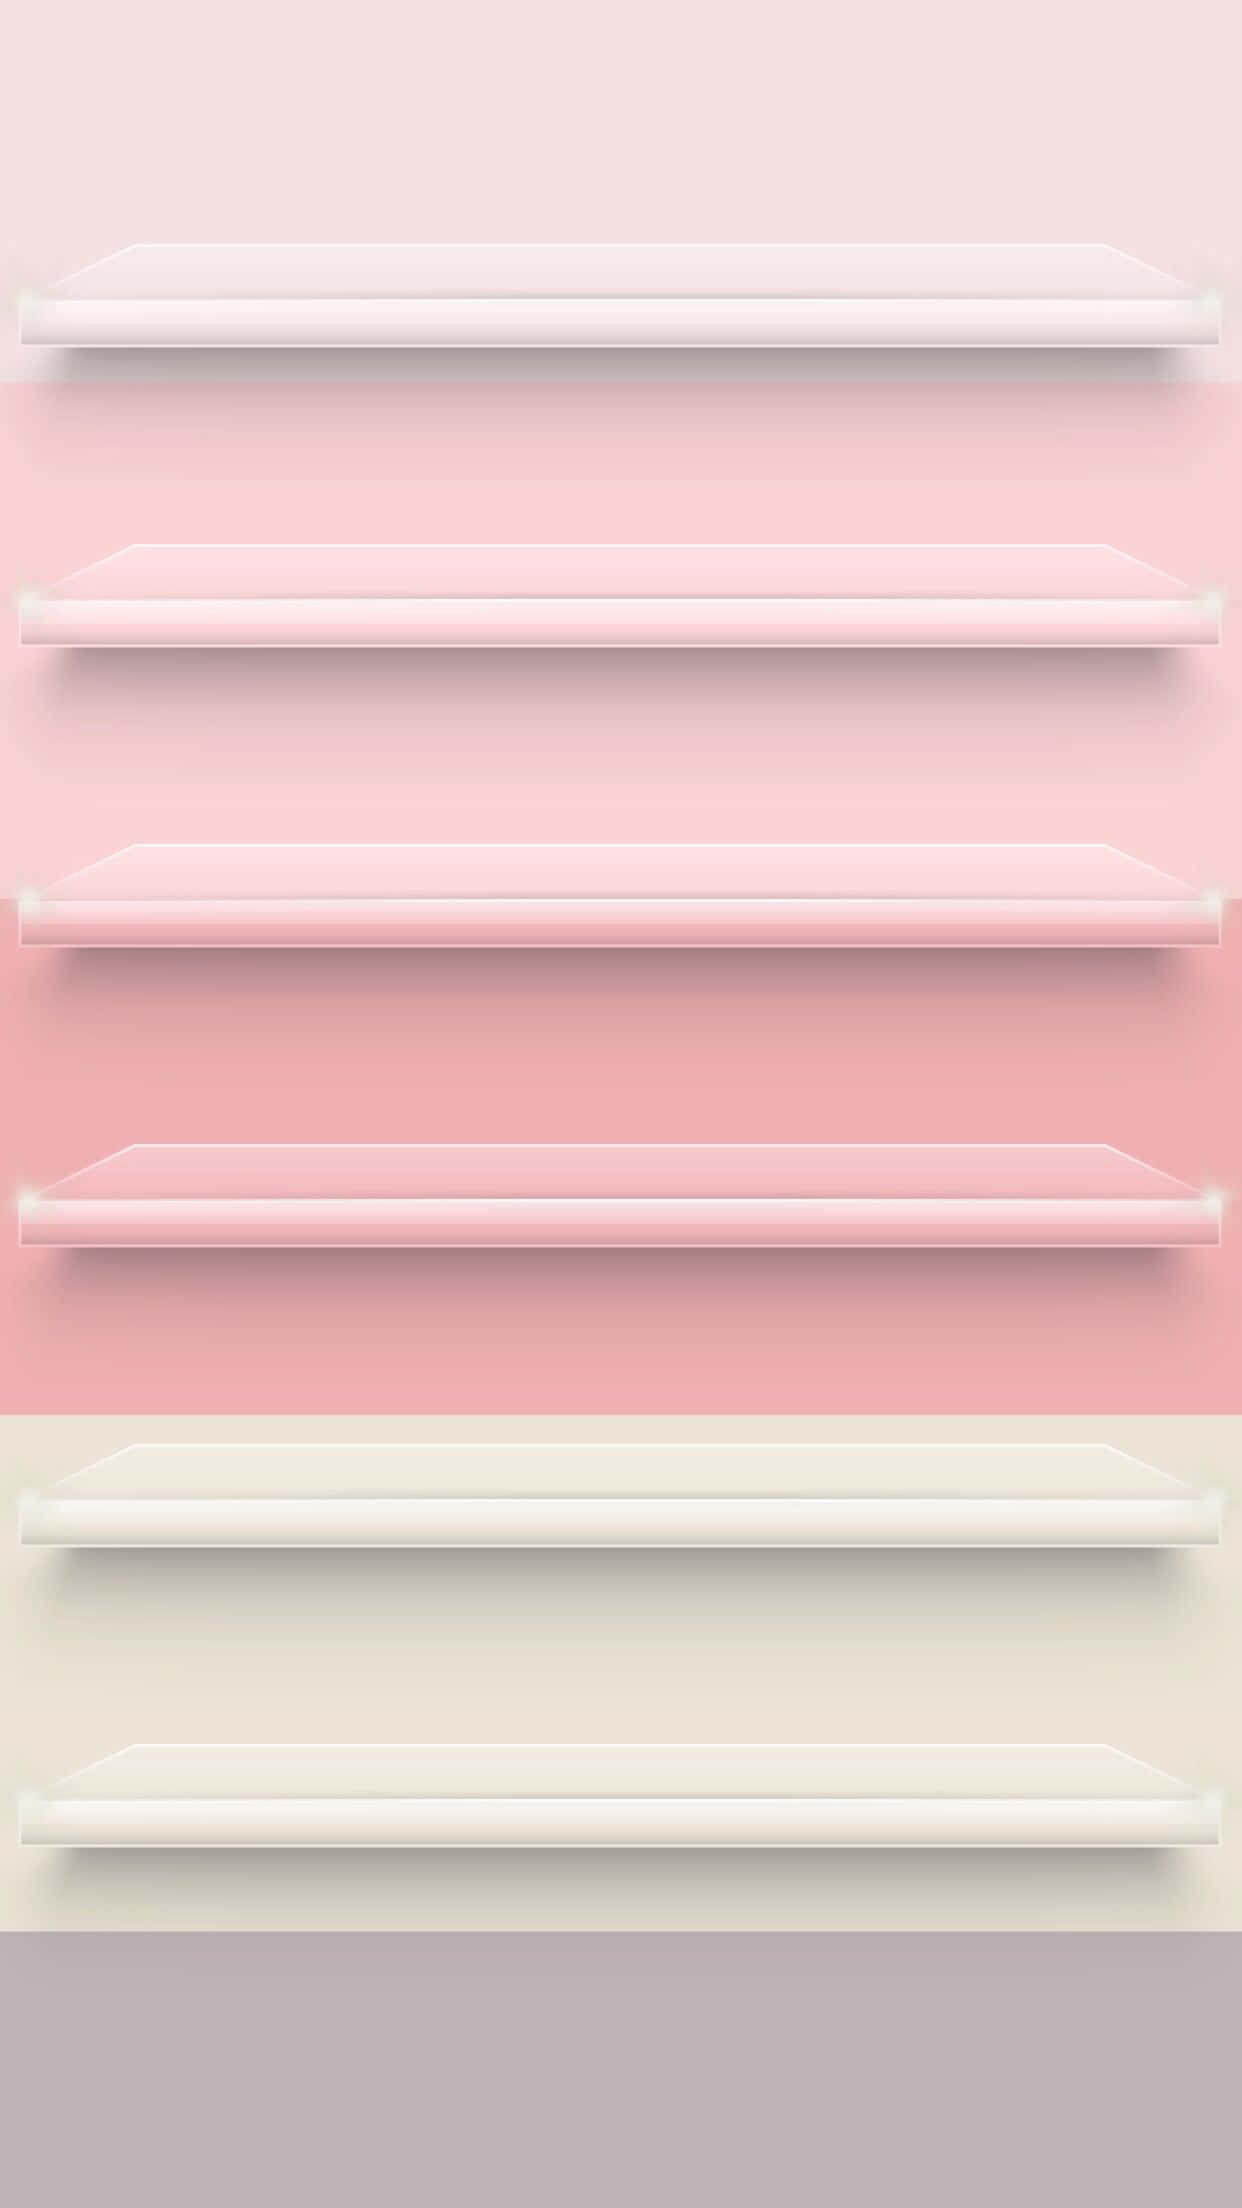 Vibrant iPhone Home Screen Background